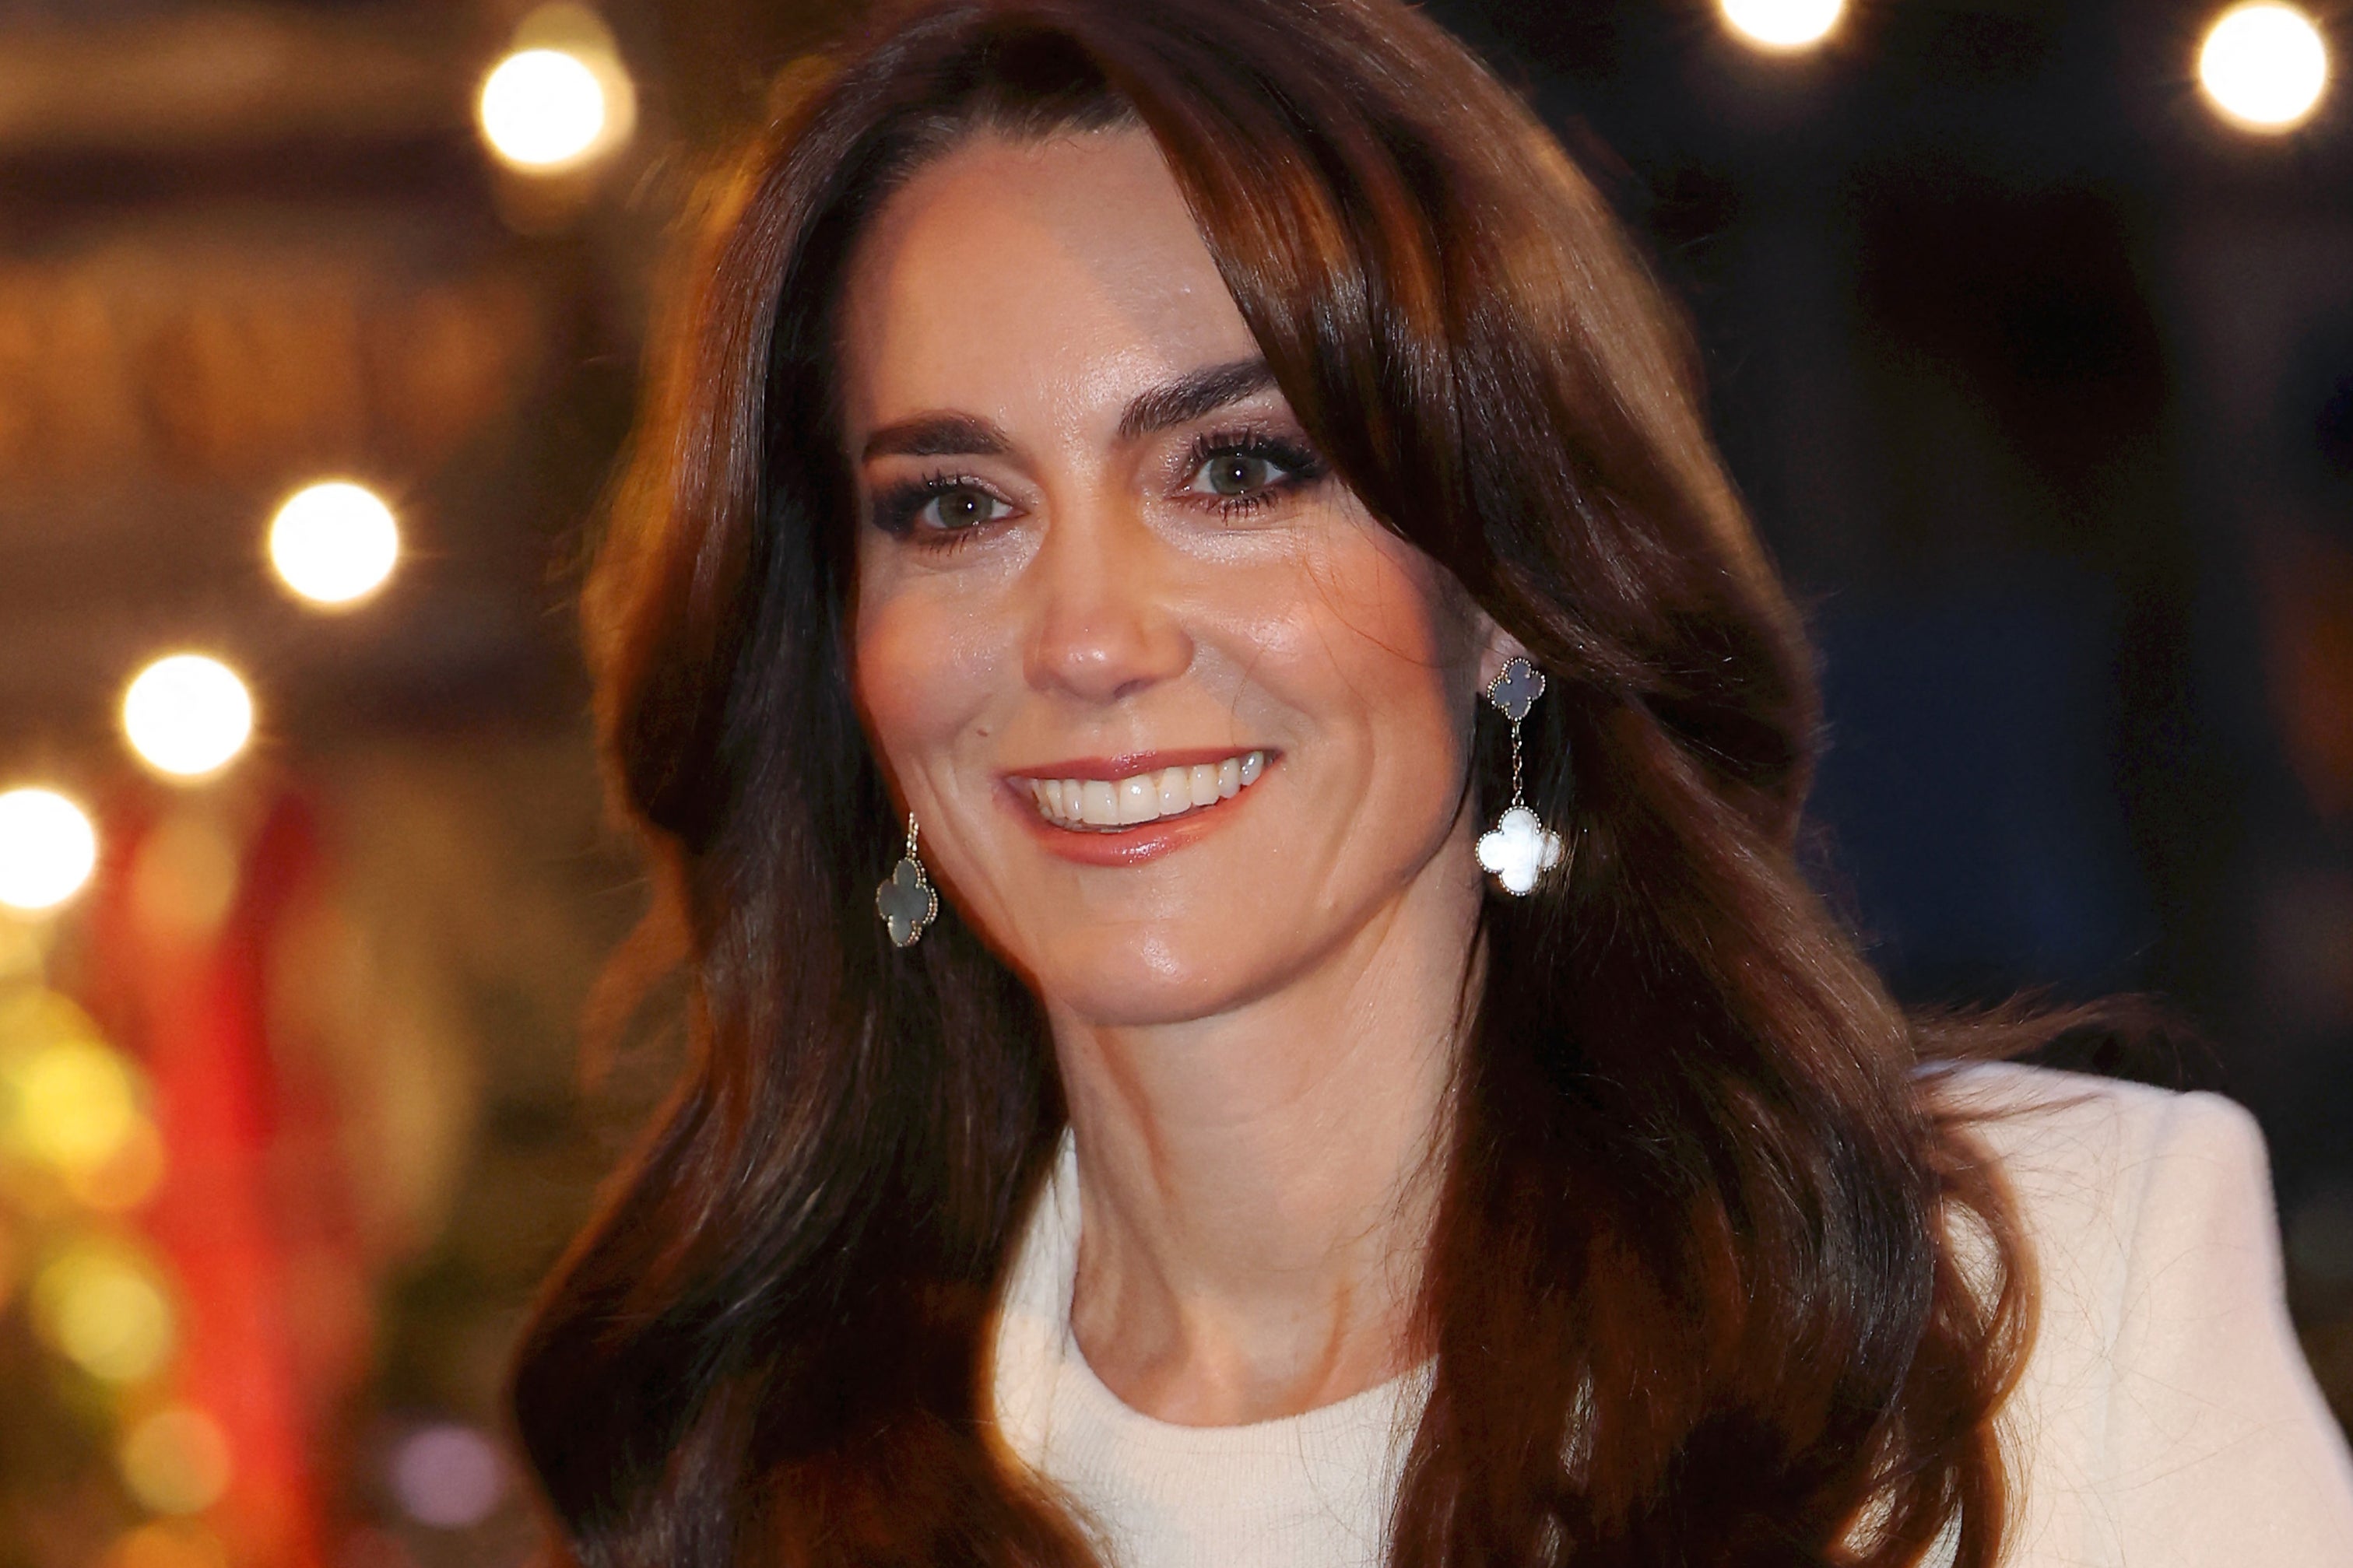 Kate is said to be doing well following her treatment